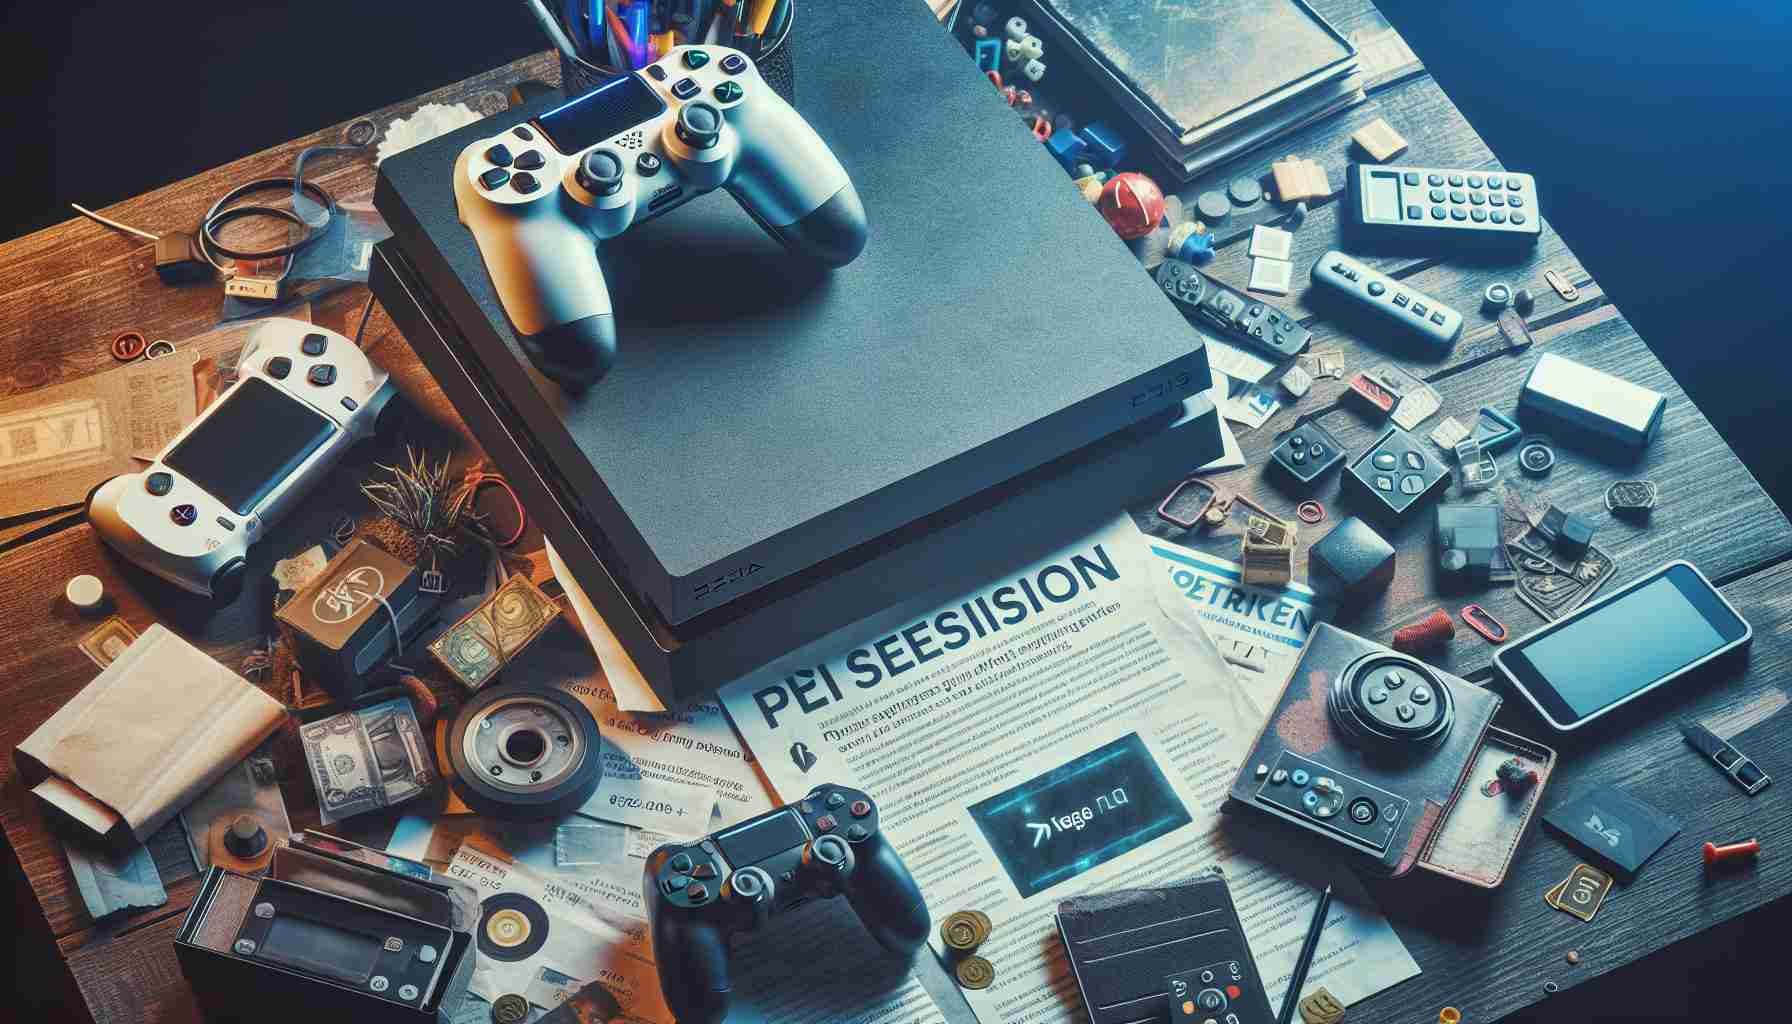 Create an image portraying a scene that symbolizes a major gaming company facing criticism for hiking the price of their popular gaming subscription service. Include a distinctly designed game console and interactable objects like gaming controllers and digital gaming cards on a cluttered desk. The overall ambiance should reflect a sense of disappointment. Avoid using any logos or company names.